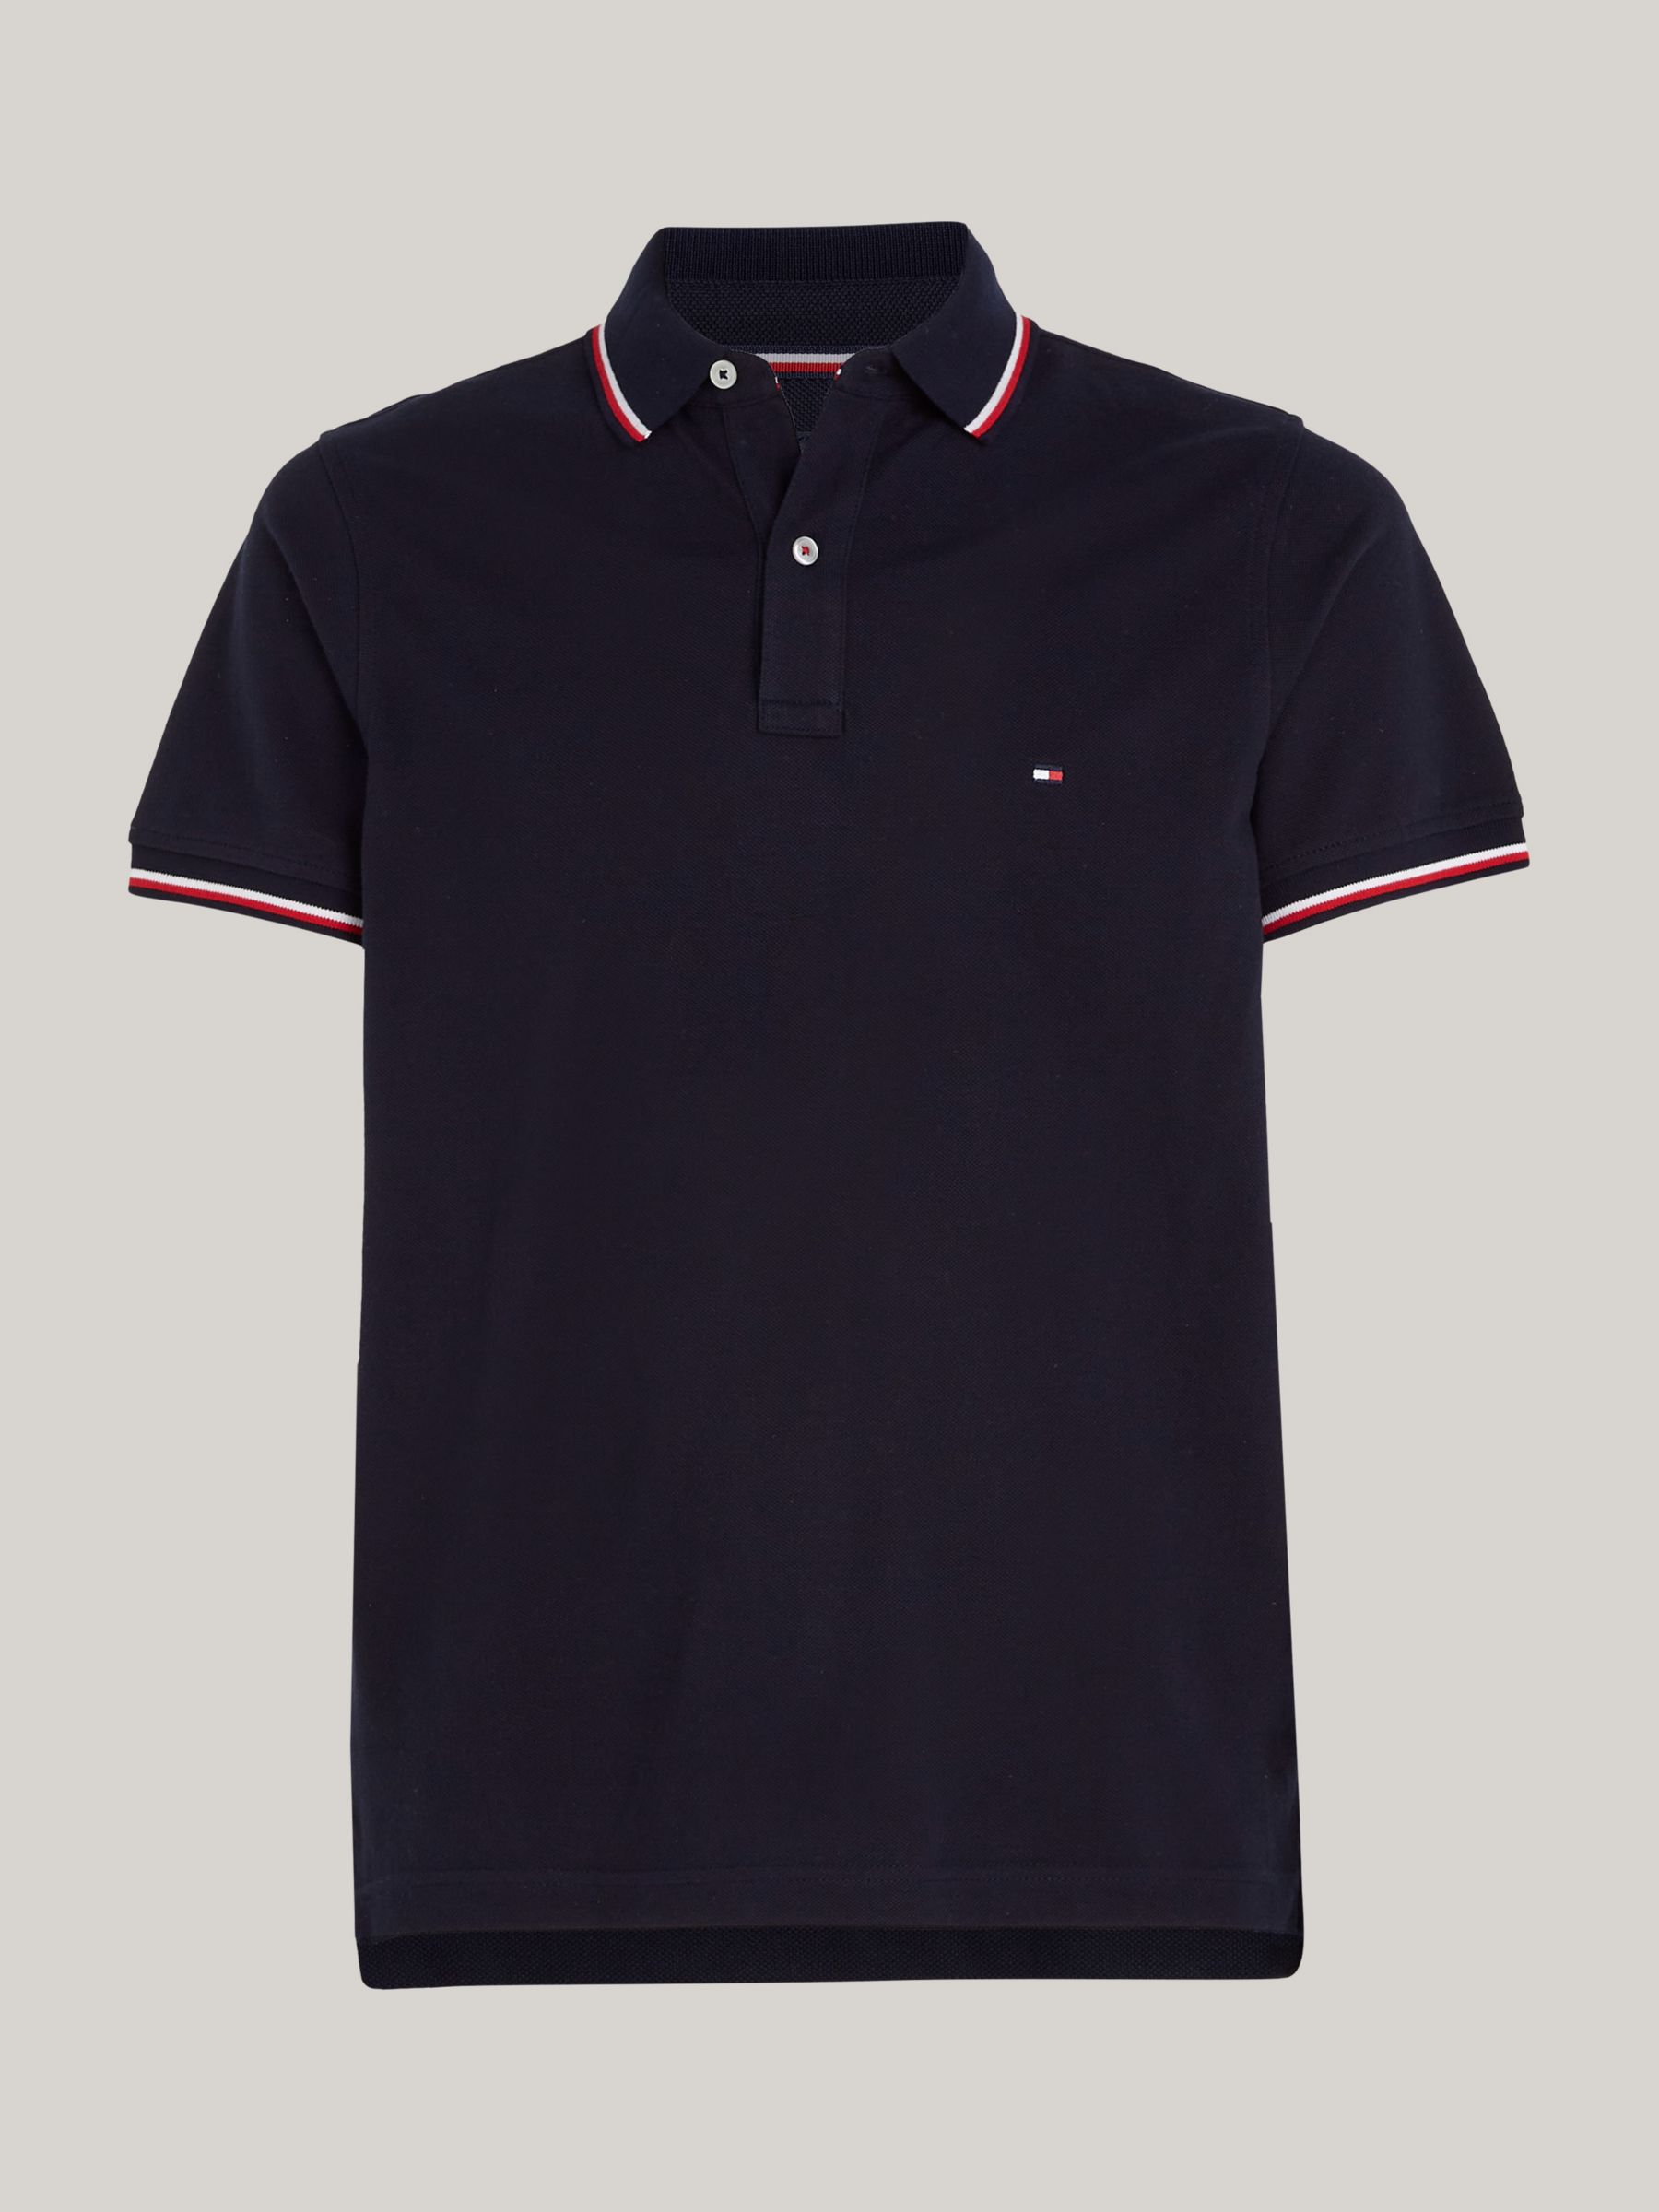 Tommy Hilfiger Tipped Organic Cotton Slim Fit Polo Shirt Desert Sky At